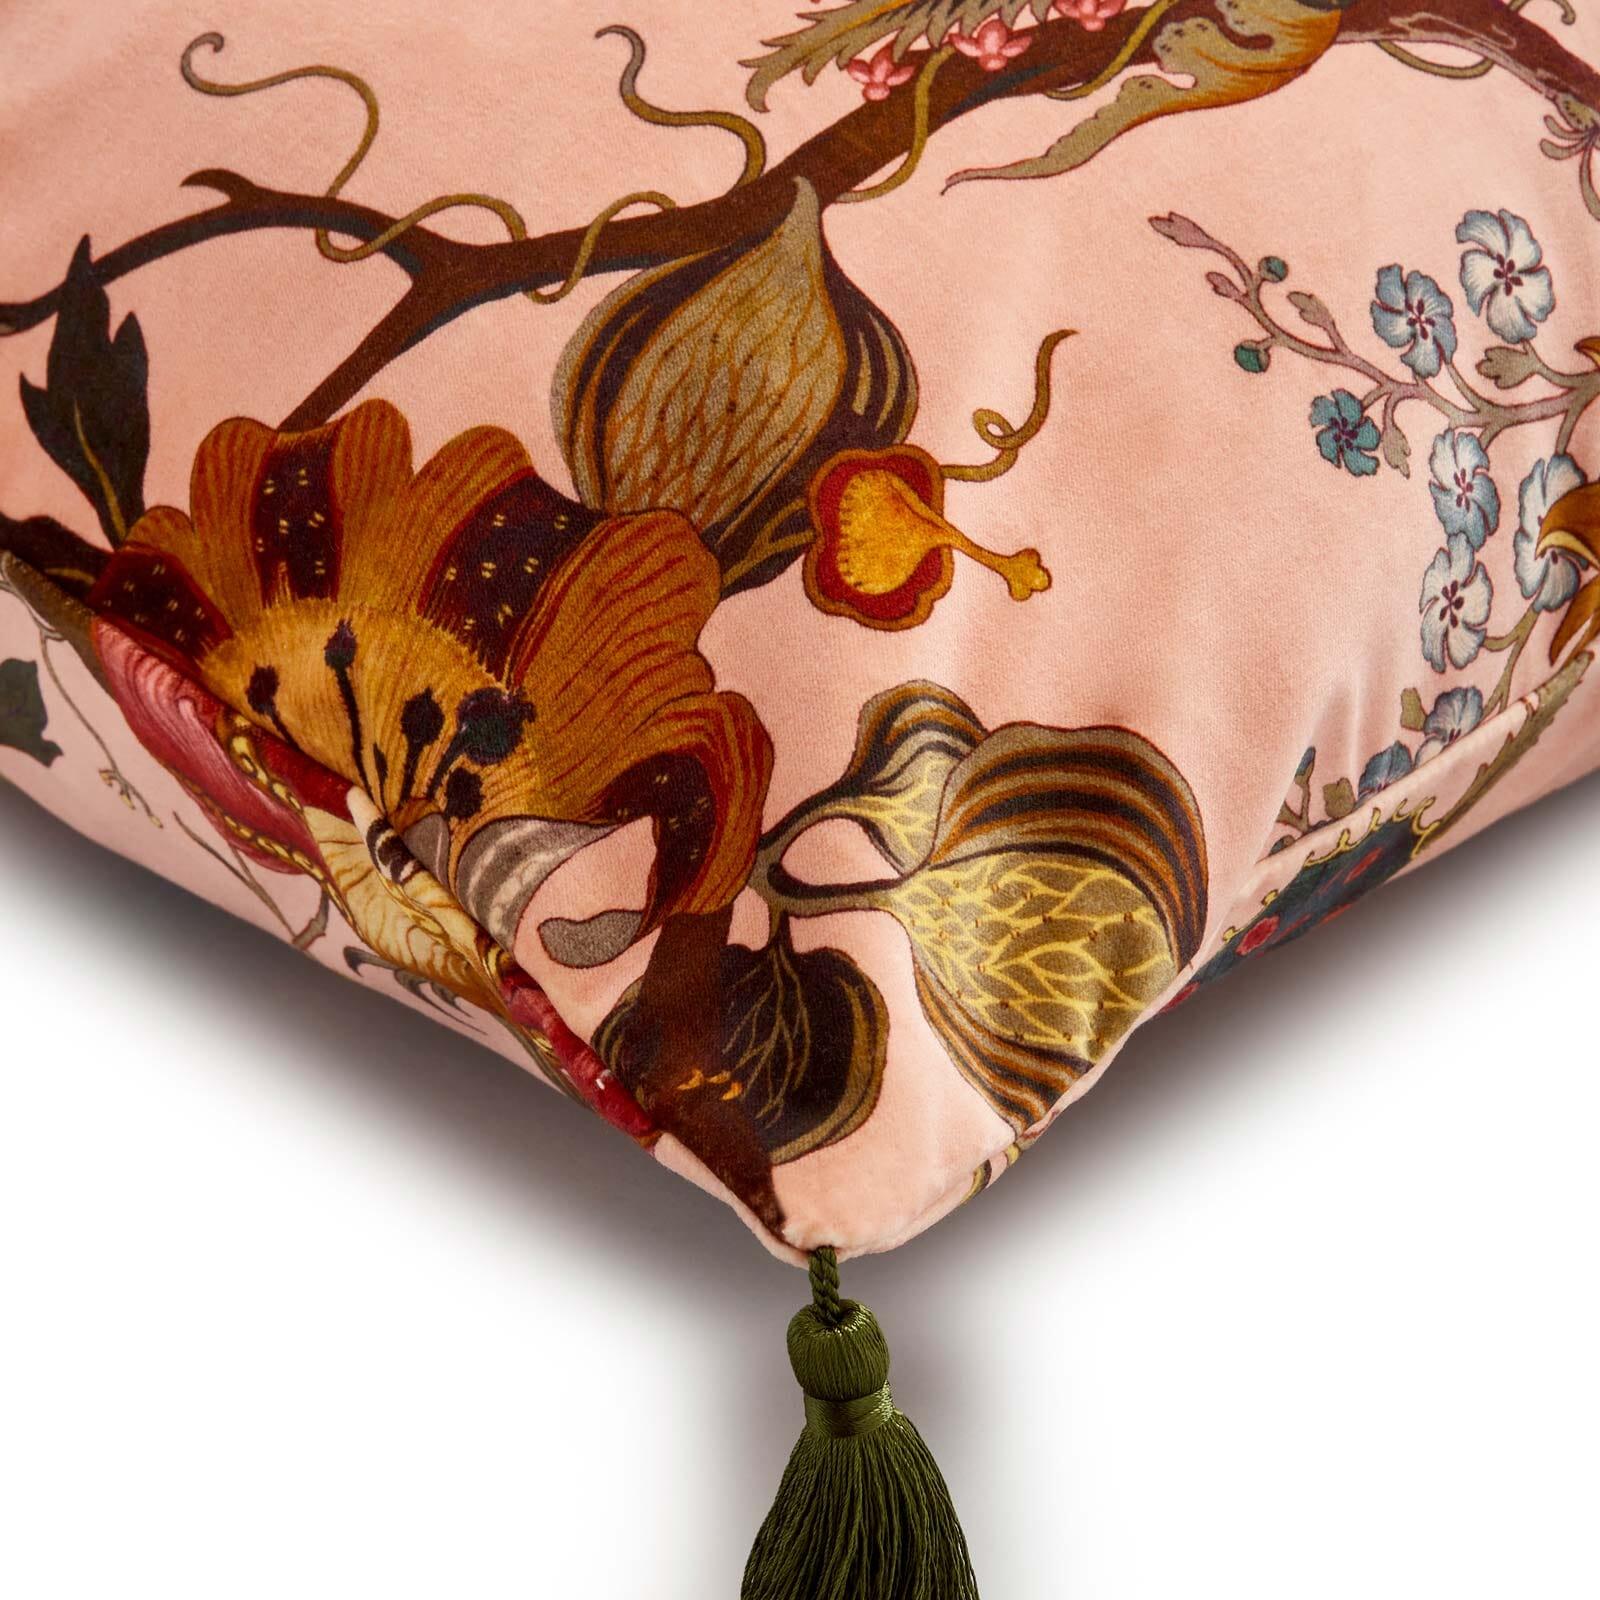 An homage to legendary Vogue editor Diana Vreeland's 'Garden in Hell' room, this ARTEMIS cushion is in fact a rather heavenly combination of painterly florals and a pretty blush pink colourway. Made in England from luxurious British velvet, it's